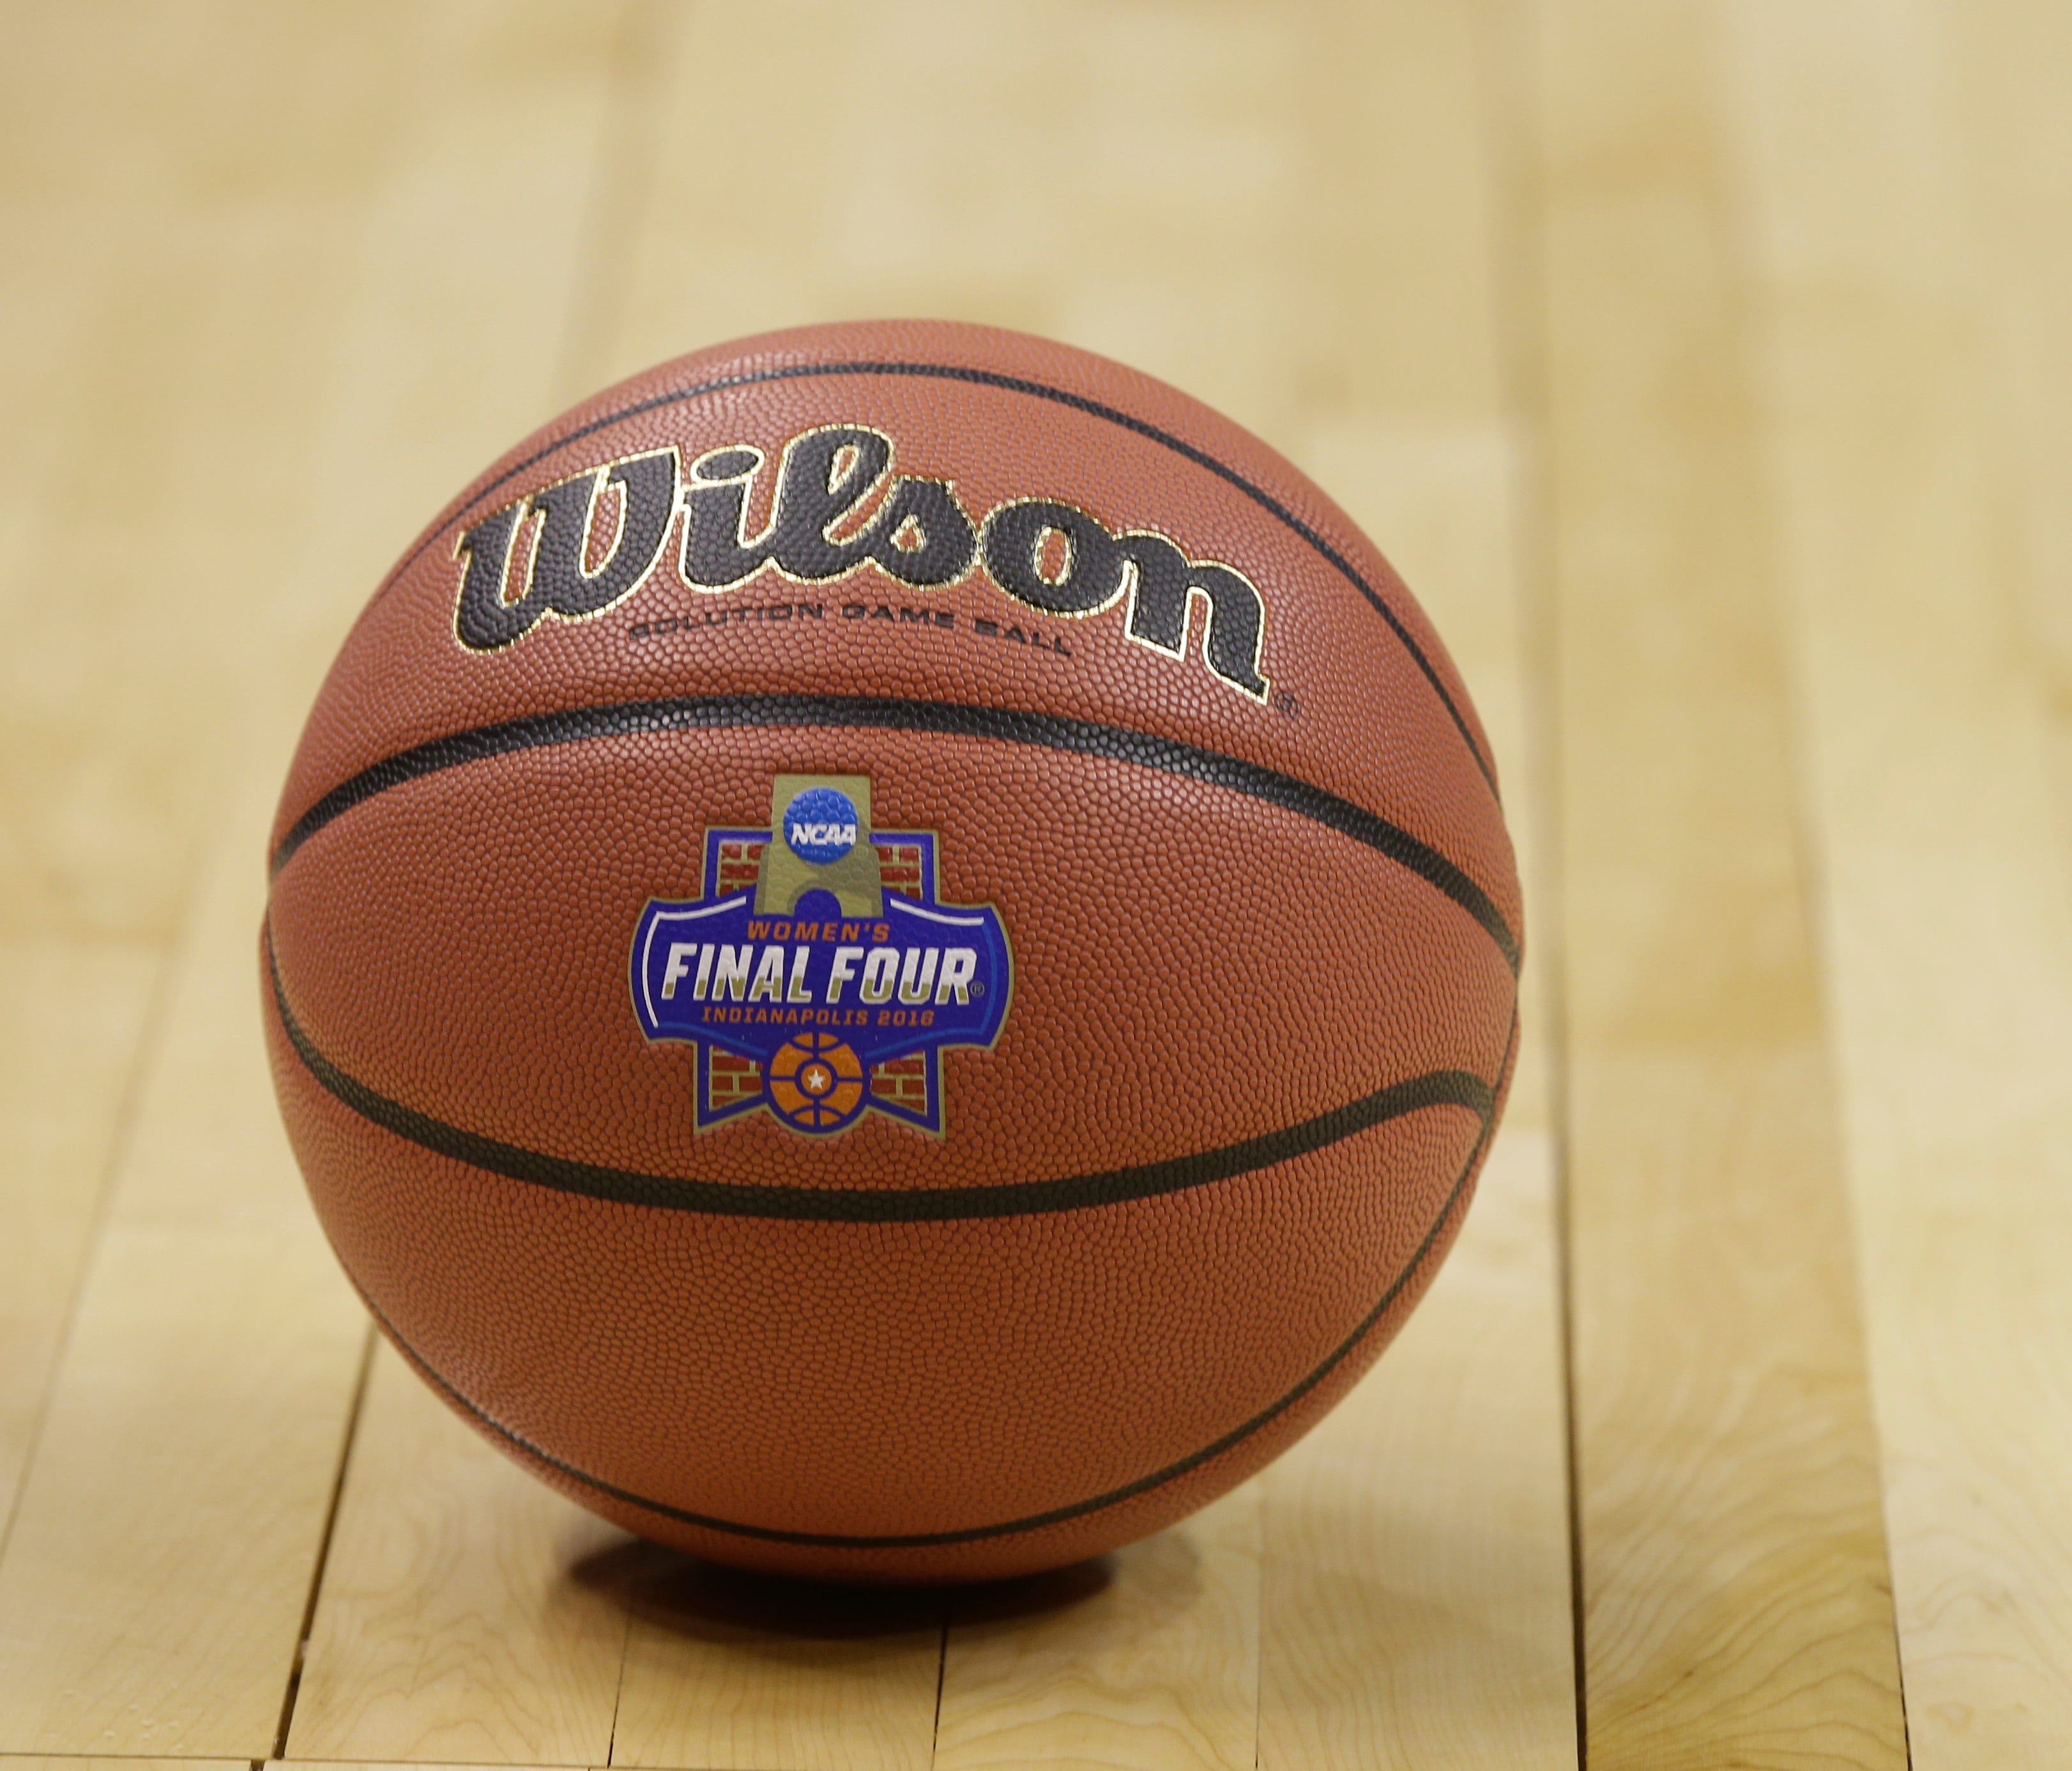 With several events scheduled to be played in Texas, including the 2017 Women's Final Four in Dallas, the NCAA will have to decide its course of action in response to SB6.